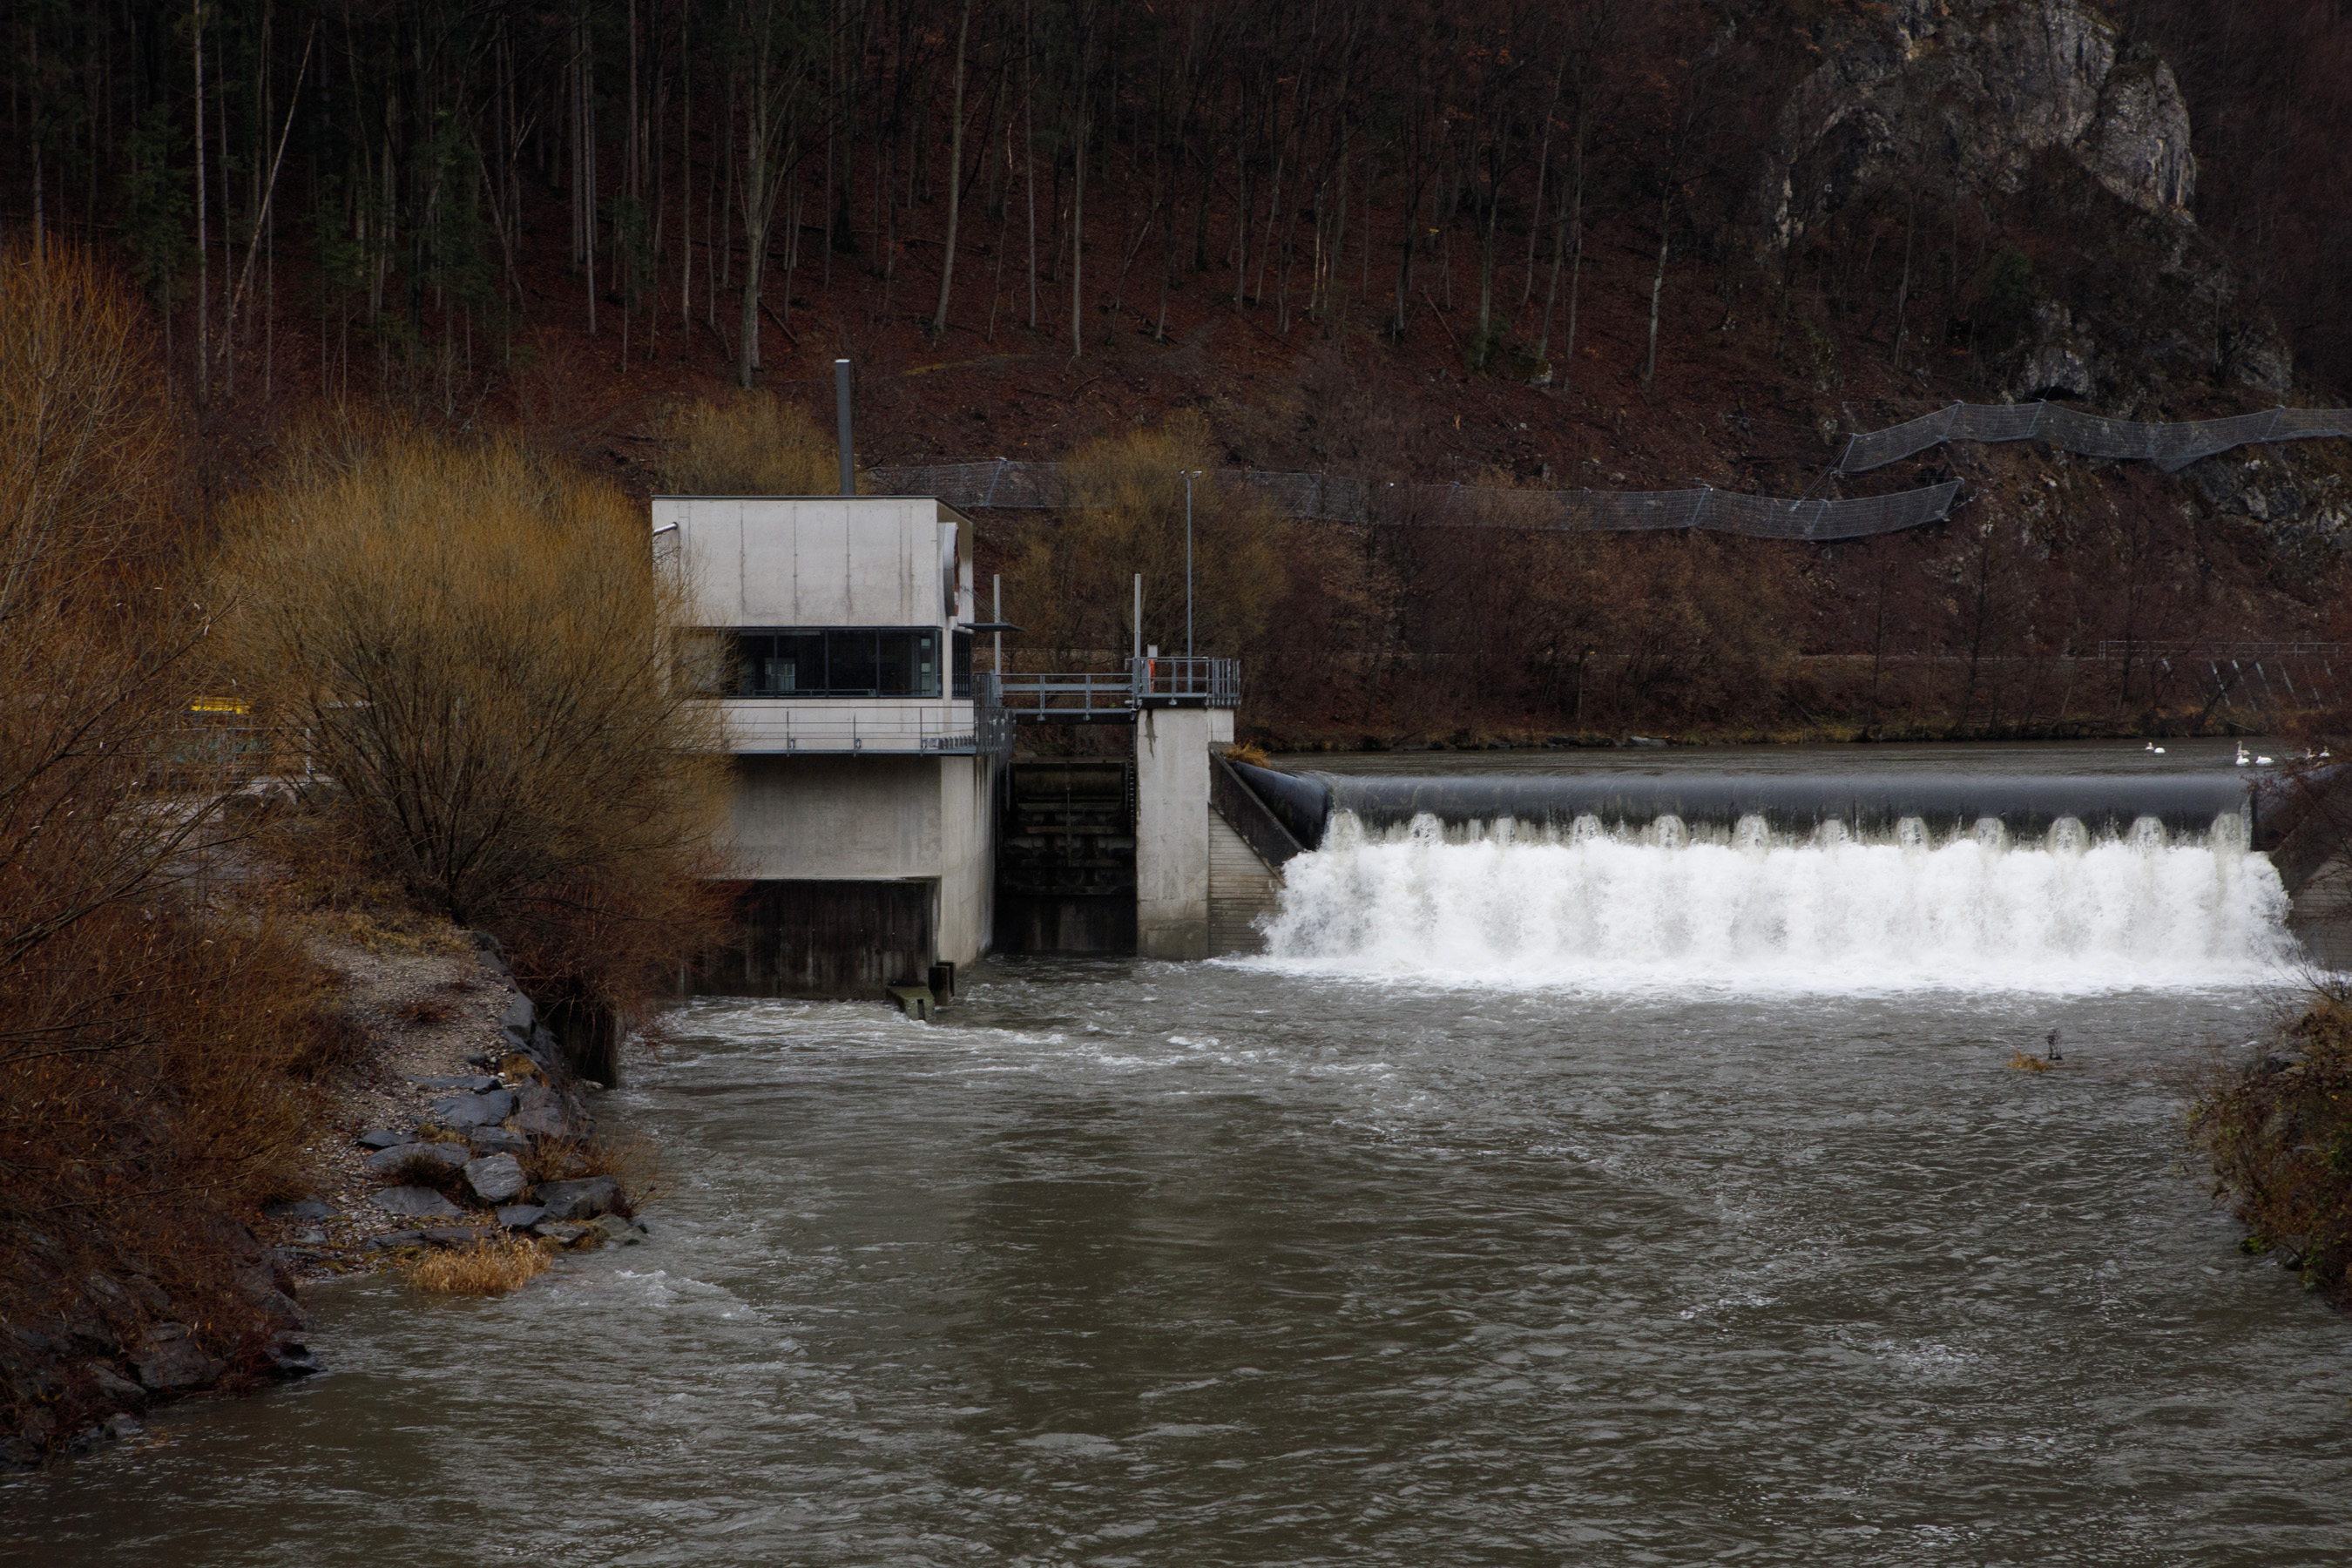 Weir and hydroplant at the Traisen, Lilienfeld